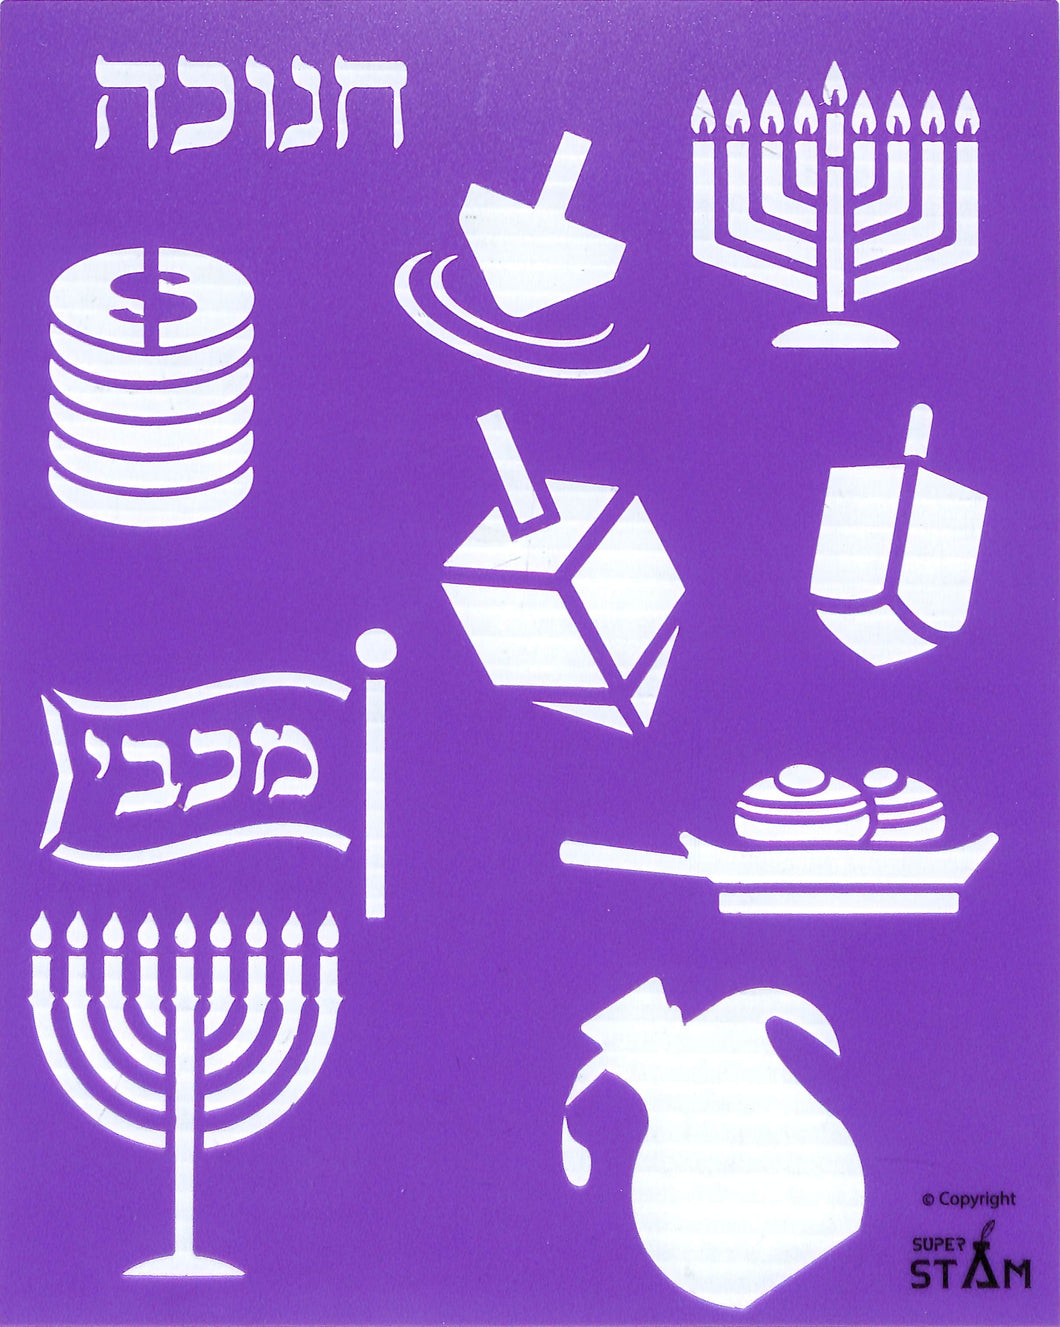 Chanukah Plastic Stencil Set for Children Drawing Painting Pretty ALEF Bet Letters Jewish Holidays Pictures and All Year Round (8 x 10 in) (Chanukah) 25 Pack